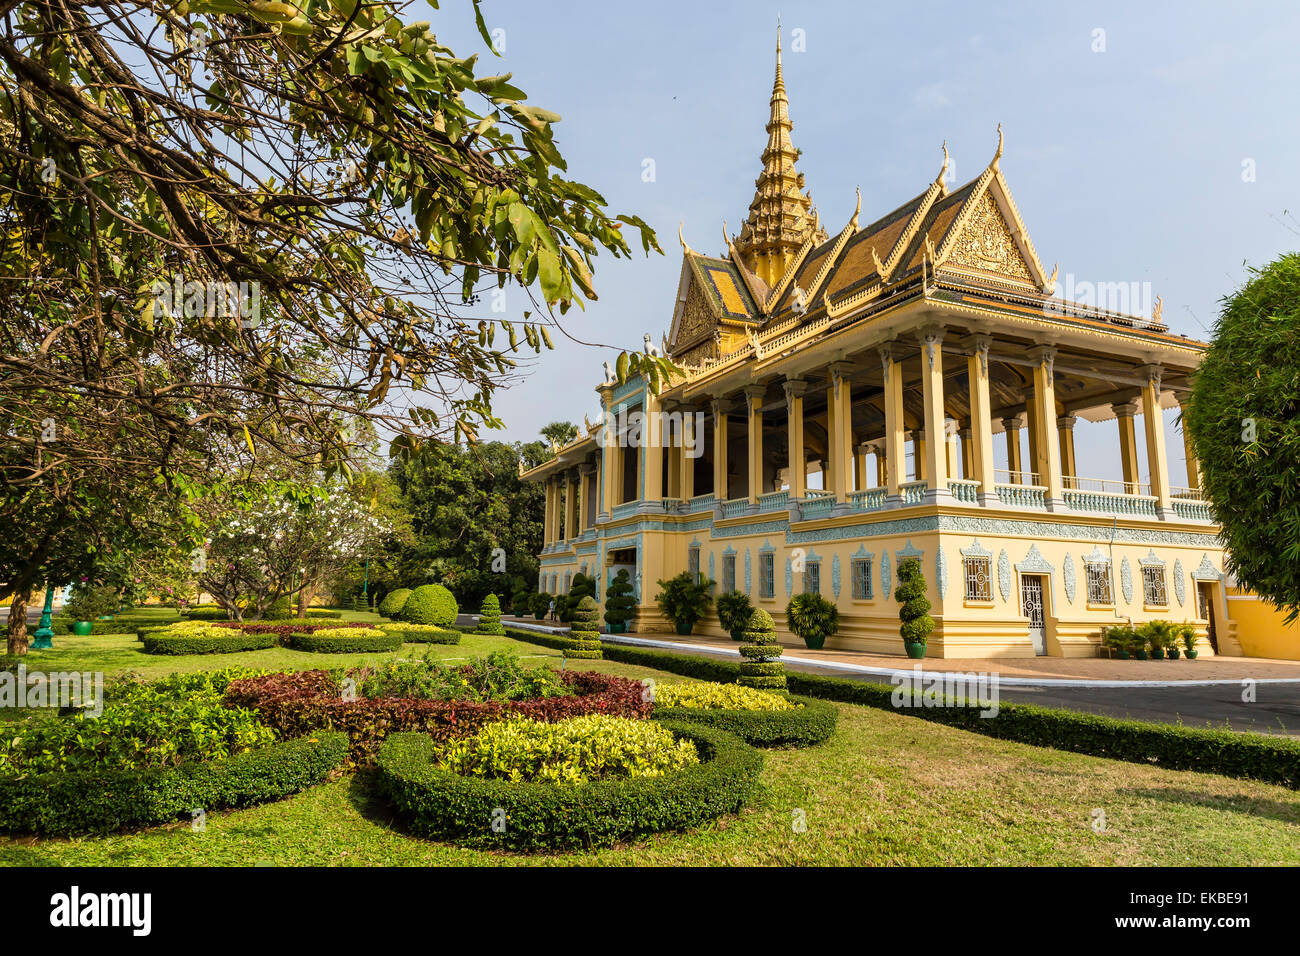 The Moonlight Pavilion, Royal Palace, in the capital city of Phnom Penh, Cambodia, Indochina, Southeast Asia, Asia Stock Photo